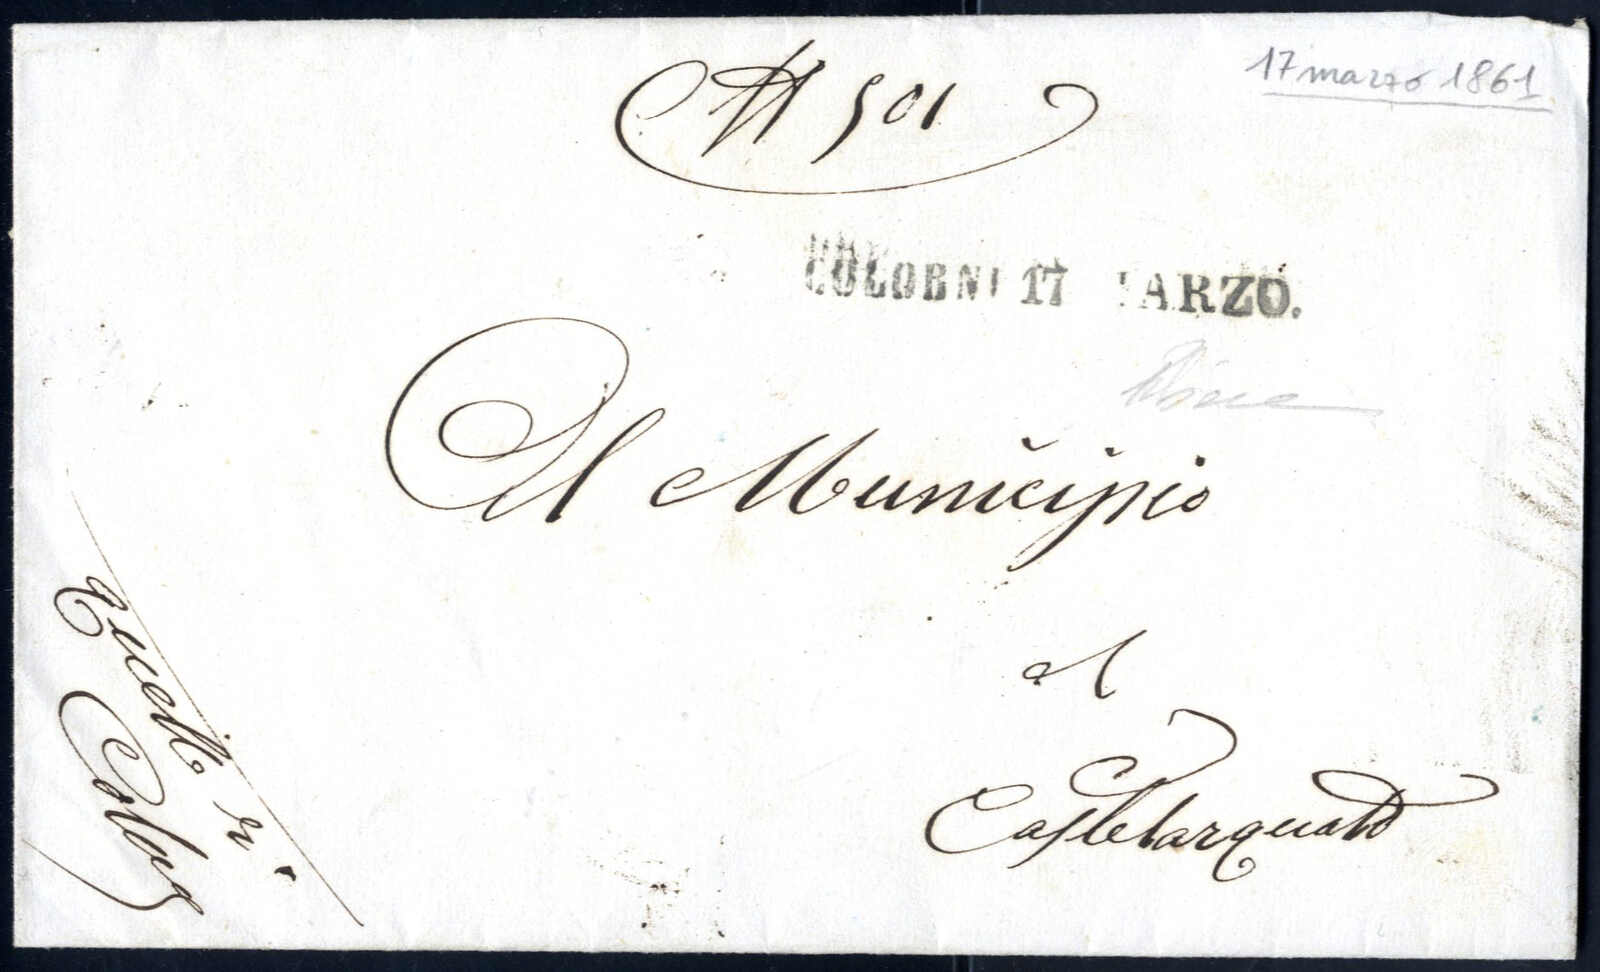 Lot 632 - europe Italian Kingdom -  Viennafil Auktionen Auction #69 Worldwide Mail Auction: Italy, Austria, Germany, Europe and Overseas